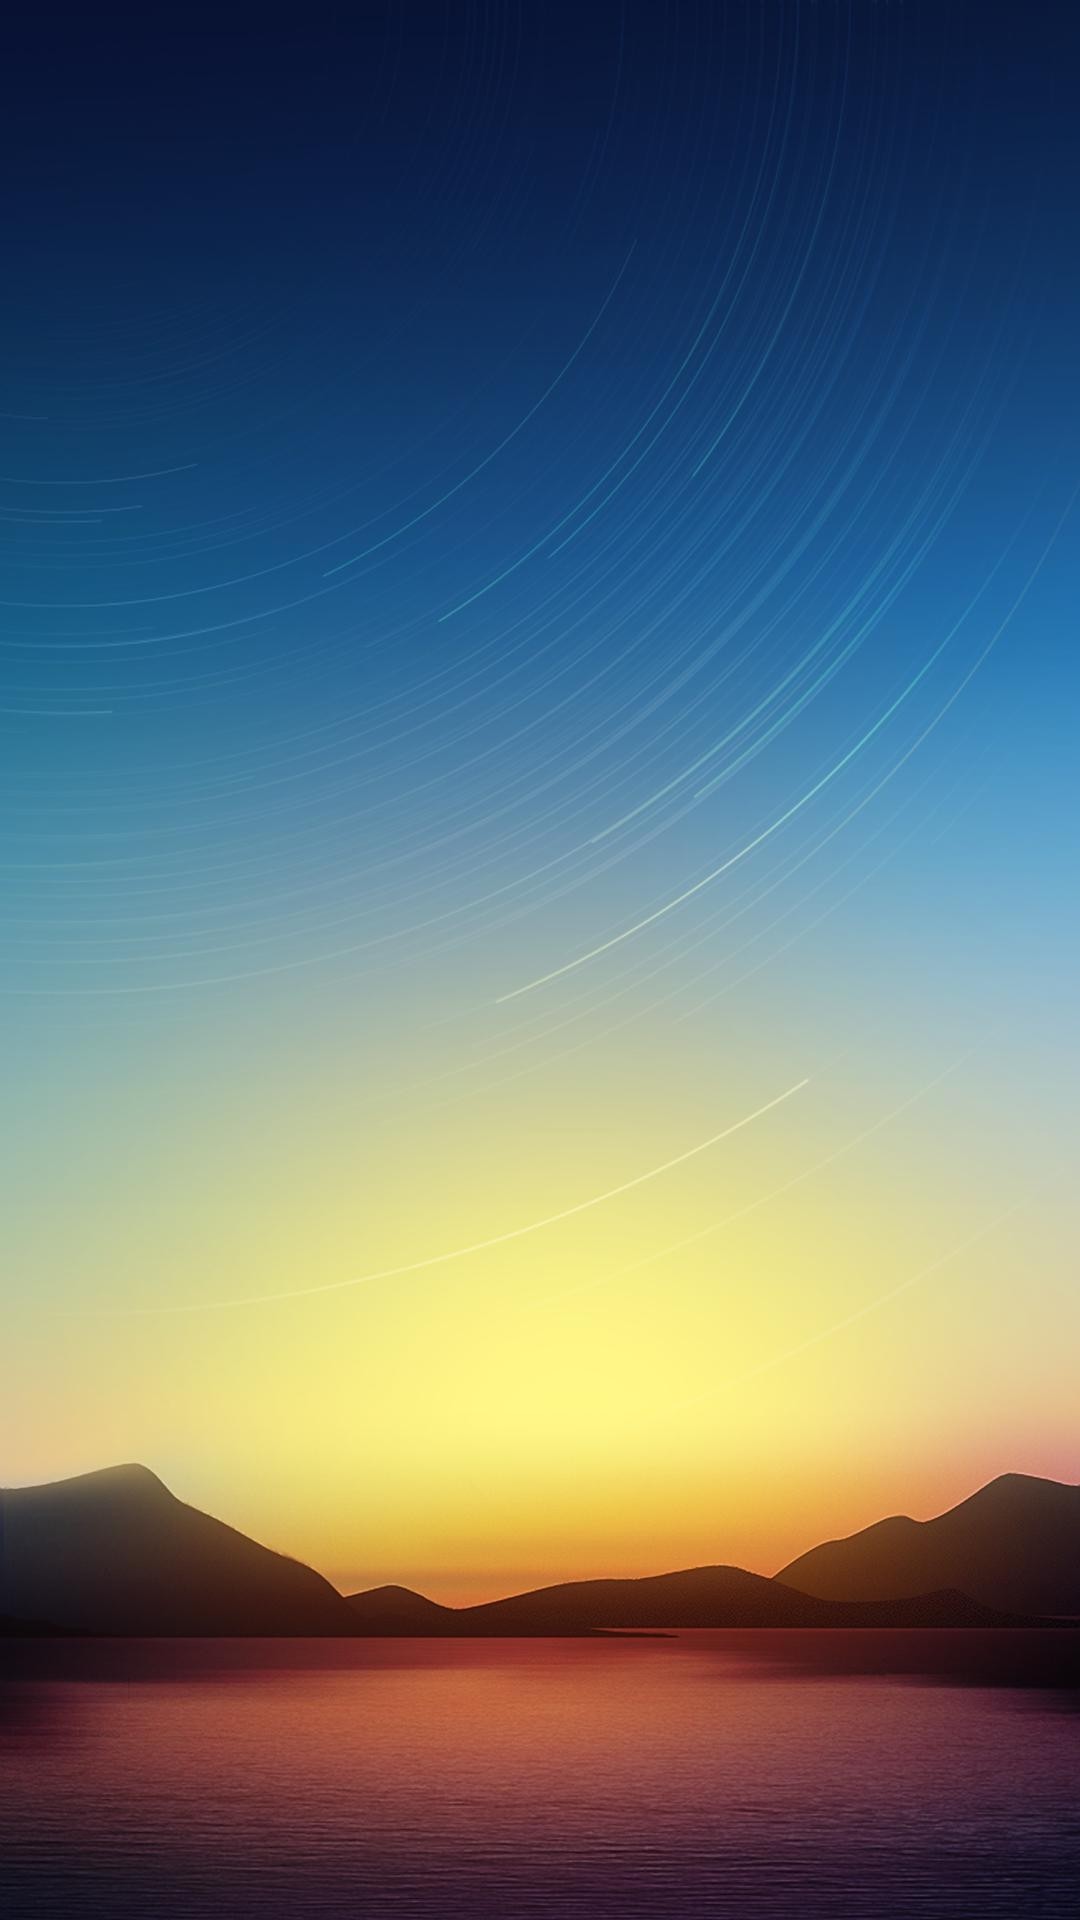 1080x1920 Upgrade Your Screen Size With These Large Phone Wallpapers Wallpaper For  Phone